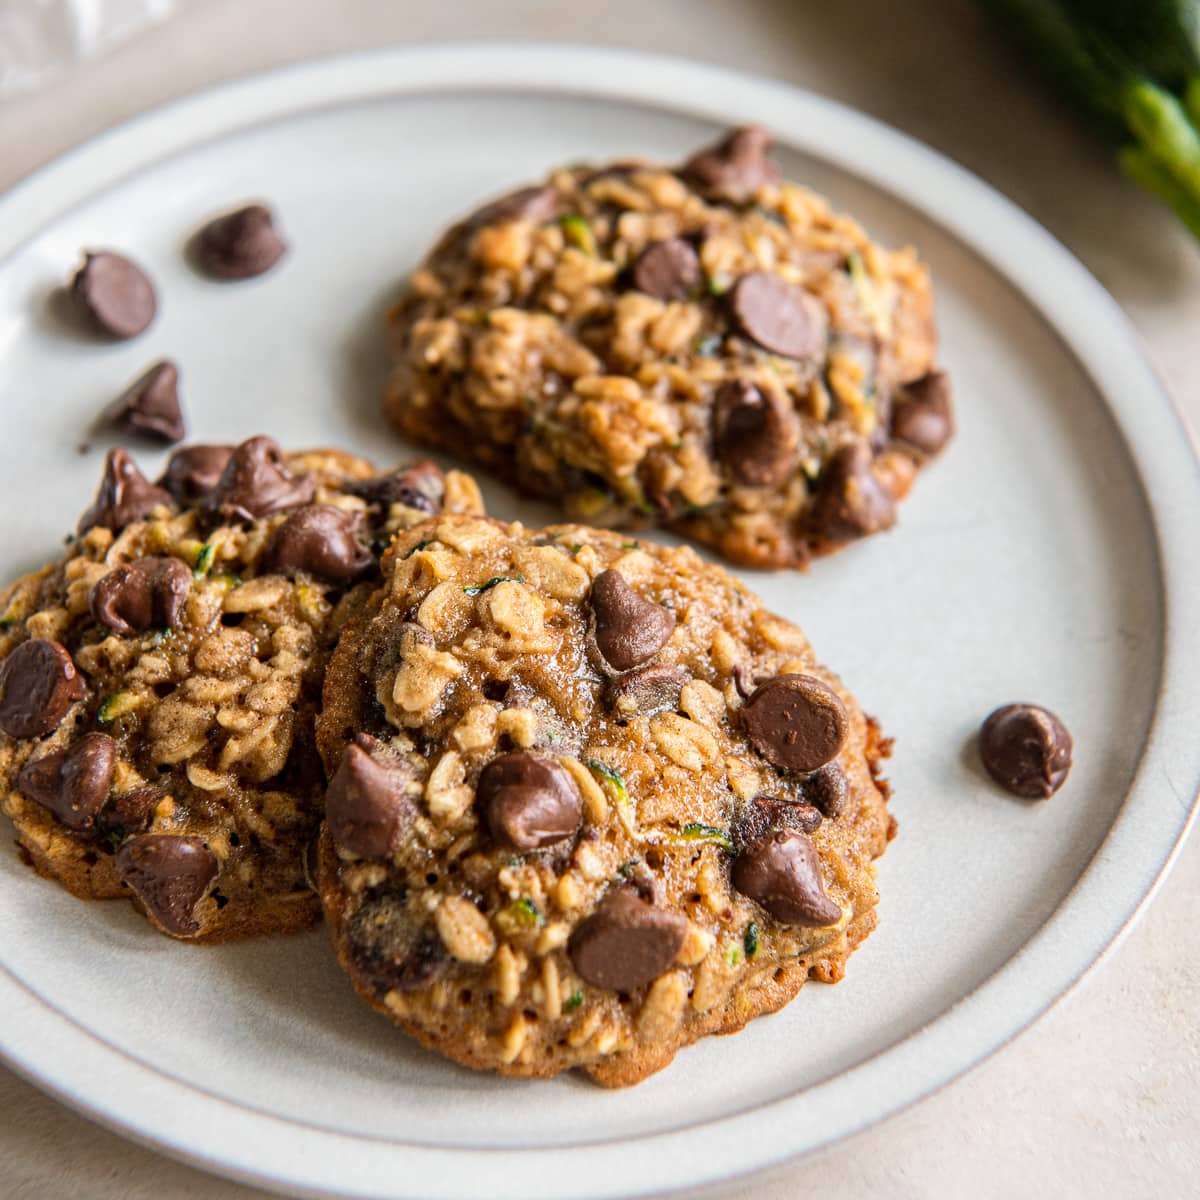 three zucchini cookies on a plate with chocolate chips.